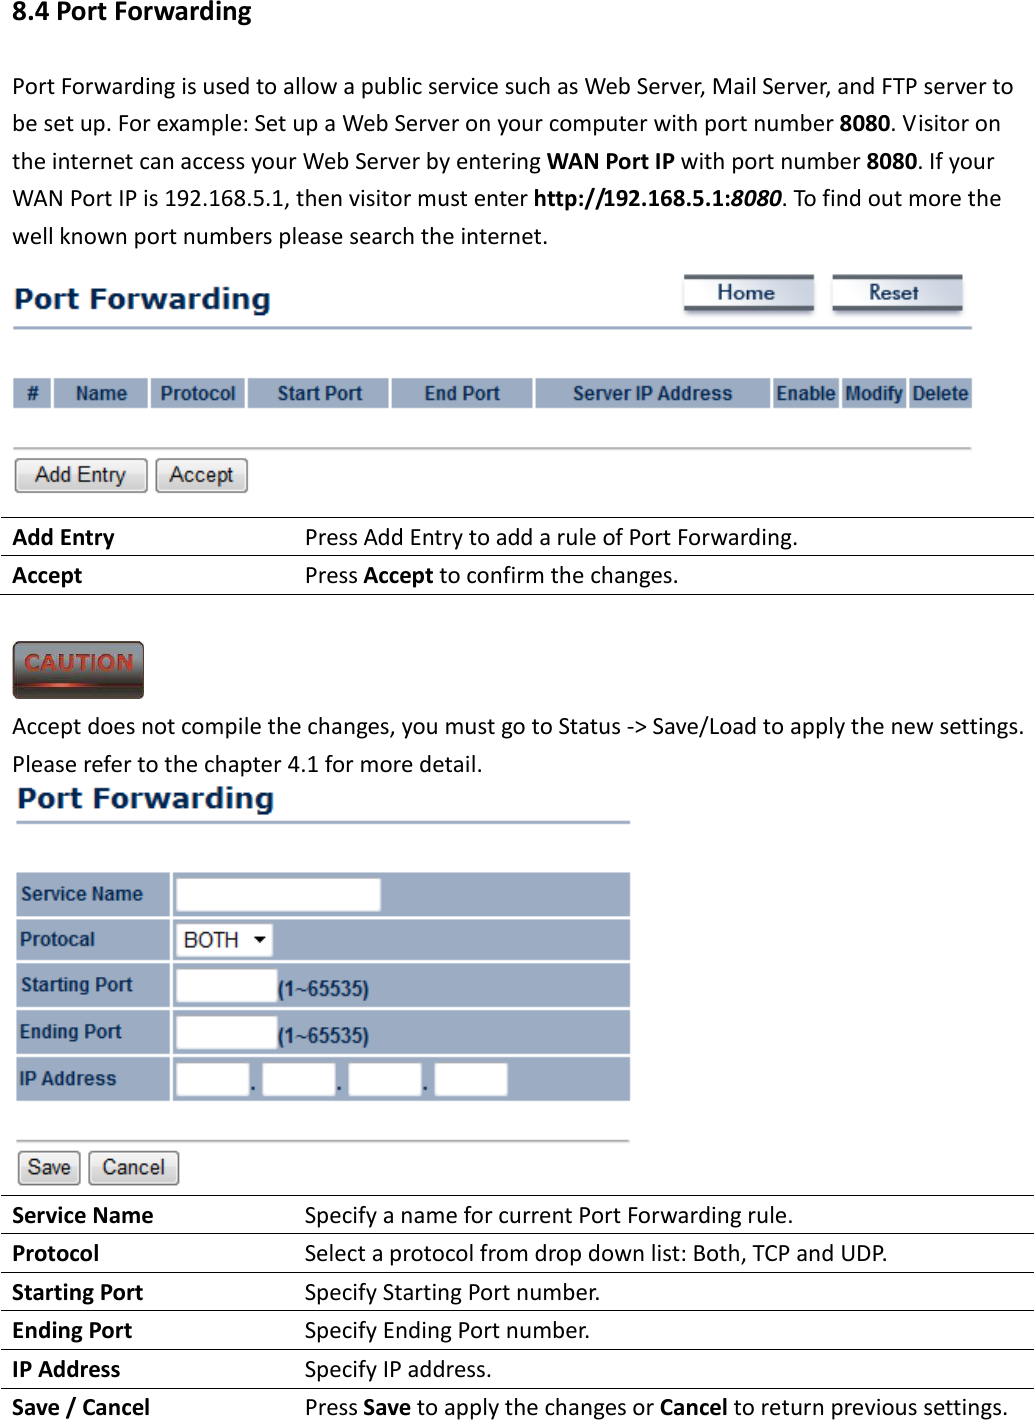 8.4 Port Forwarding Port Forwarding is used to allow a public service such as Web Server, Mail Server, and FTP server to be set up. For example: Set up a Web Server on your computer with port number 8080. Visitor on the internet can access your Web Server by entering WAN Port IP with port number 8080. If your WAN Port IP is 192.168.5.1, then visitor must enter http://192.168.5.1:8080. To find out more the well known port numbers please search the internet.  Add Entry  Press Add Entry to add a rule of Port Forwarding. Accept  Press Accept to confirm the changes.   Accept does not compile the changes, you must go to Status -&gt; Save/Load to apply the new settings. Please refer to the chapter 4.1 for more detail.  Service Name  Specify a name for current Port Forwarding rule. Protocol  Select a protocol from drop down list: Both, TCP and UDP. Starting Port  Specify Starting Port number. Ending Port  Specify Ending Port number. IP Address  Specify IP address. Save / Cancel  Press Save to apply the changes or Cancel to return previous settings.  